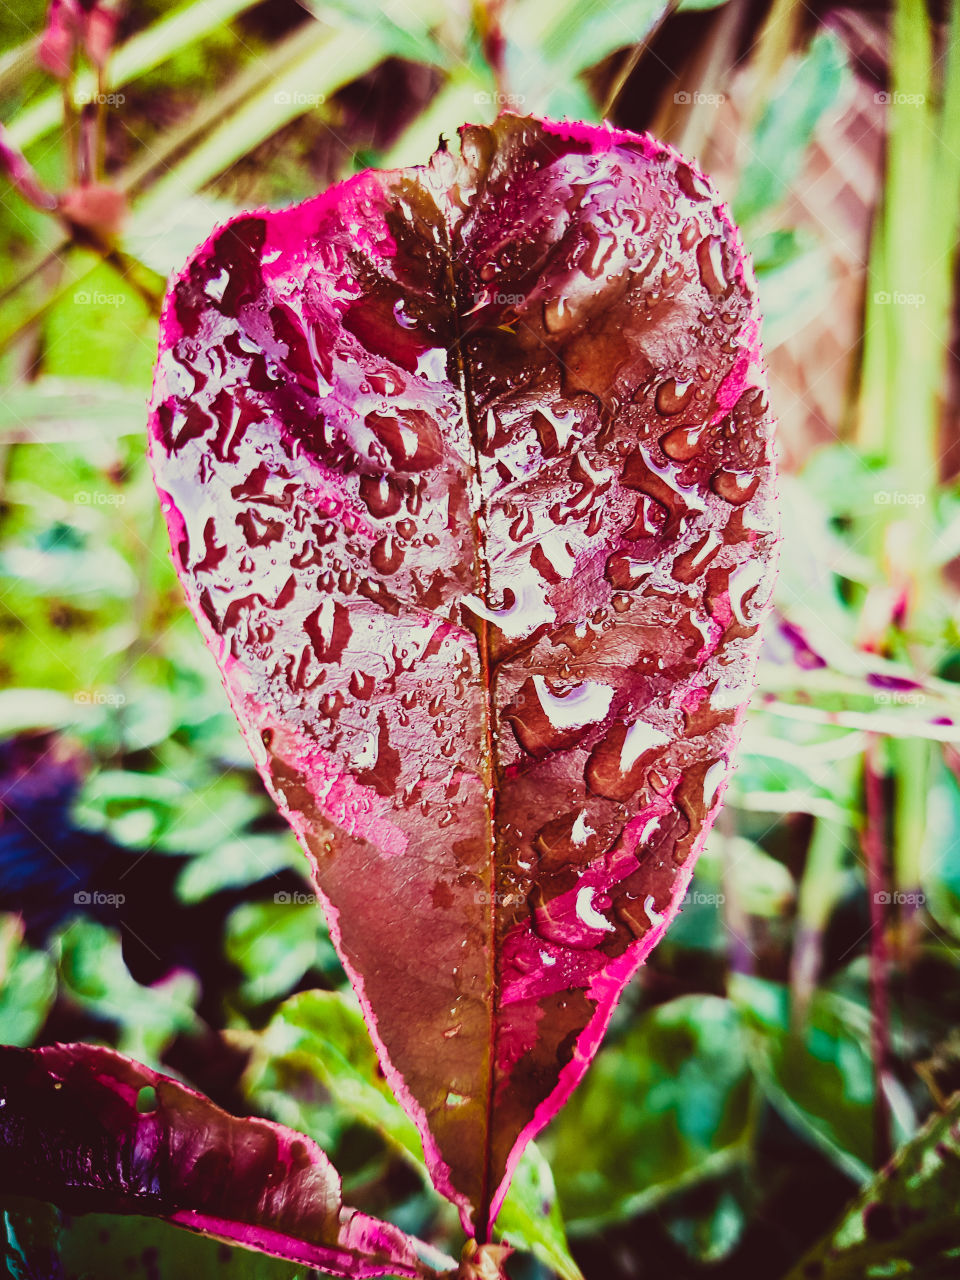 English garden, Raindrops on a beautiful pink leaf, close up nature.